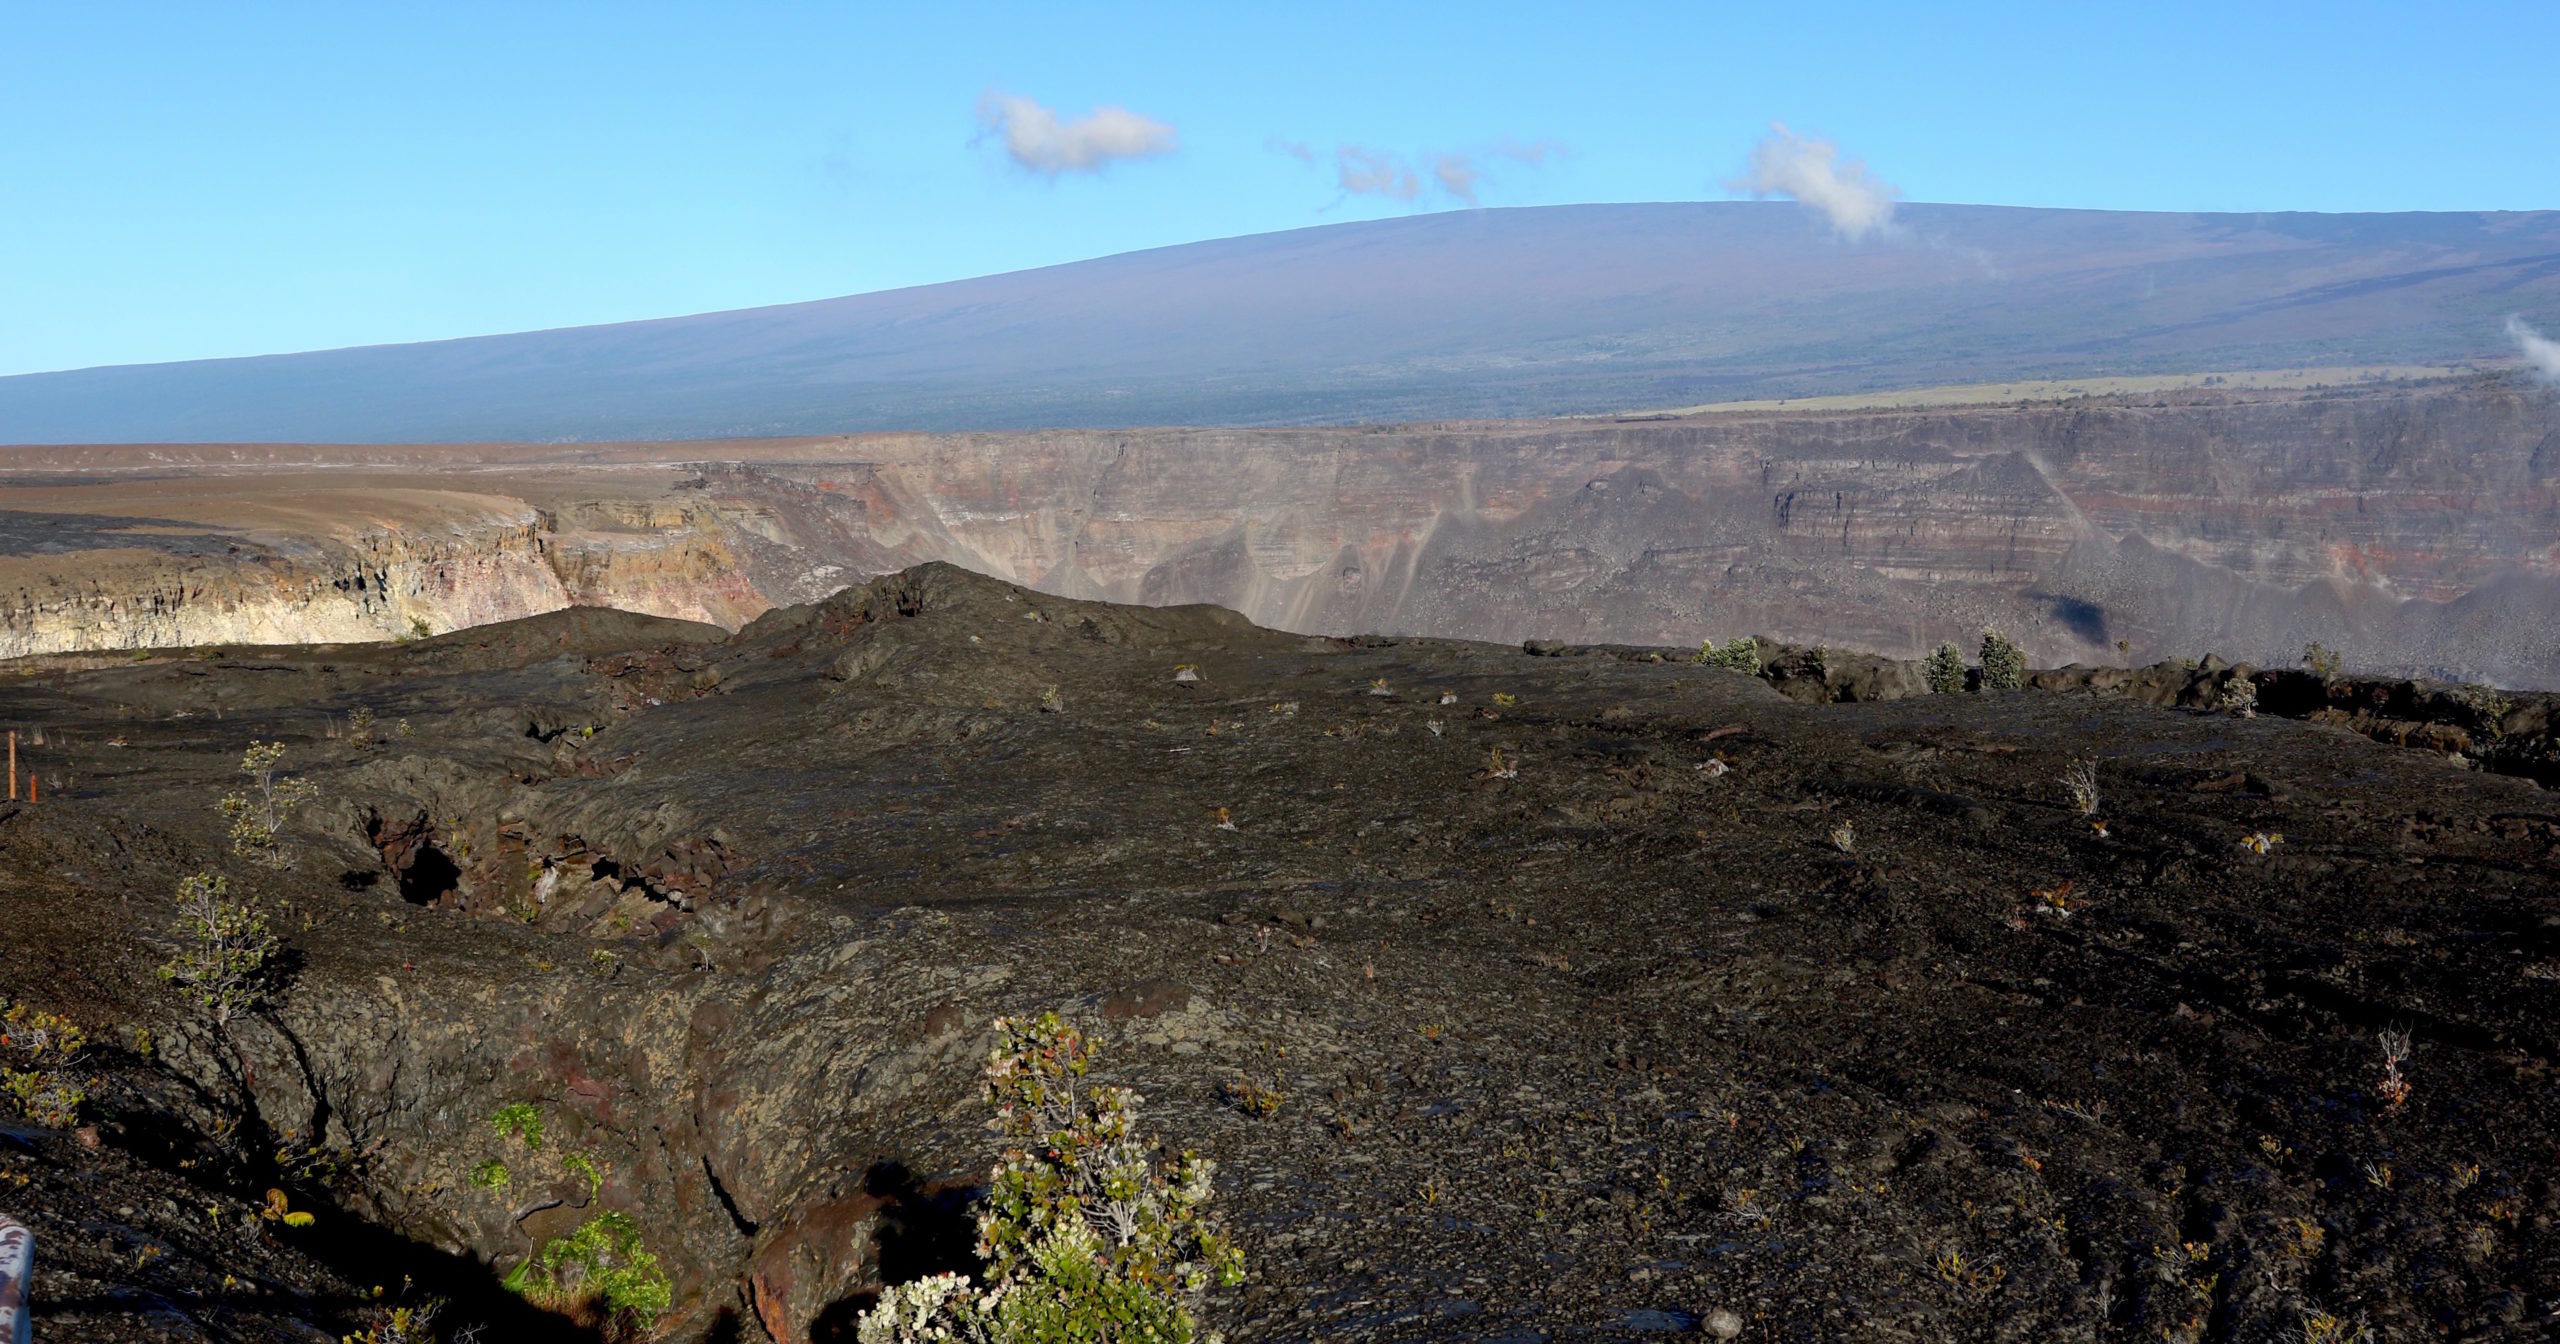 Hawaii's Mauna Loa volcano, background, towers over the summit crater of Kilauea volcano in Hawaii Volcanoes National Park on the Big Island on April 25, 2019.